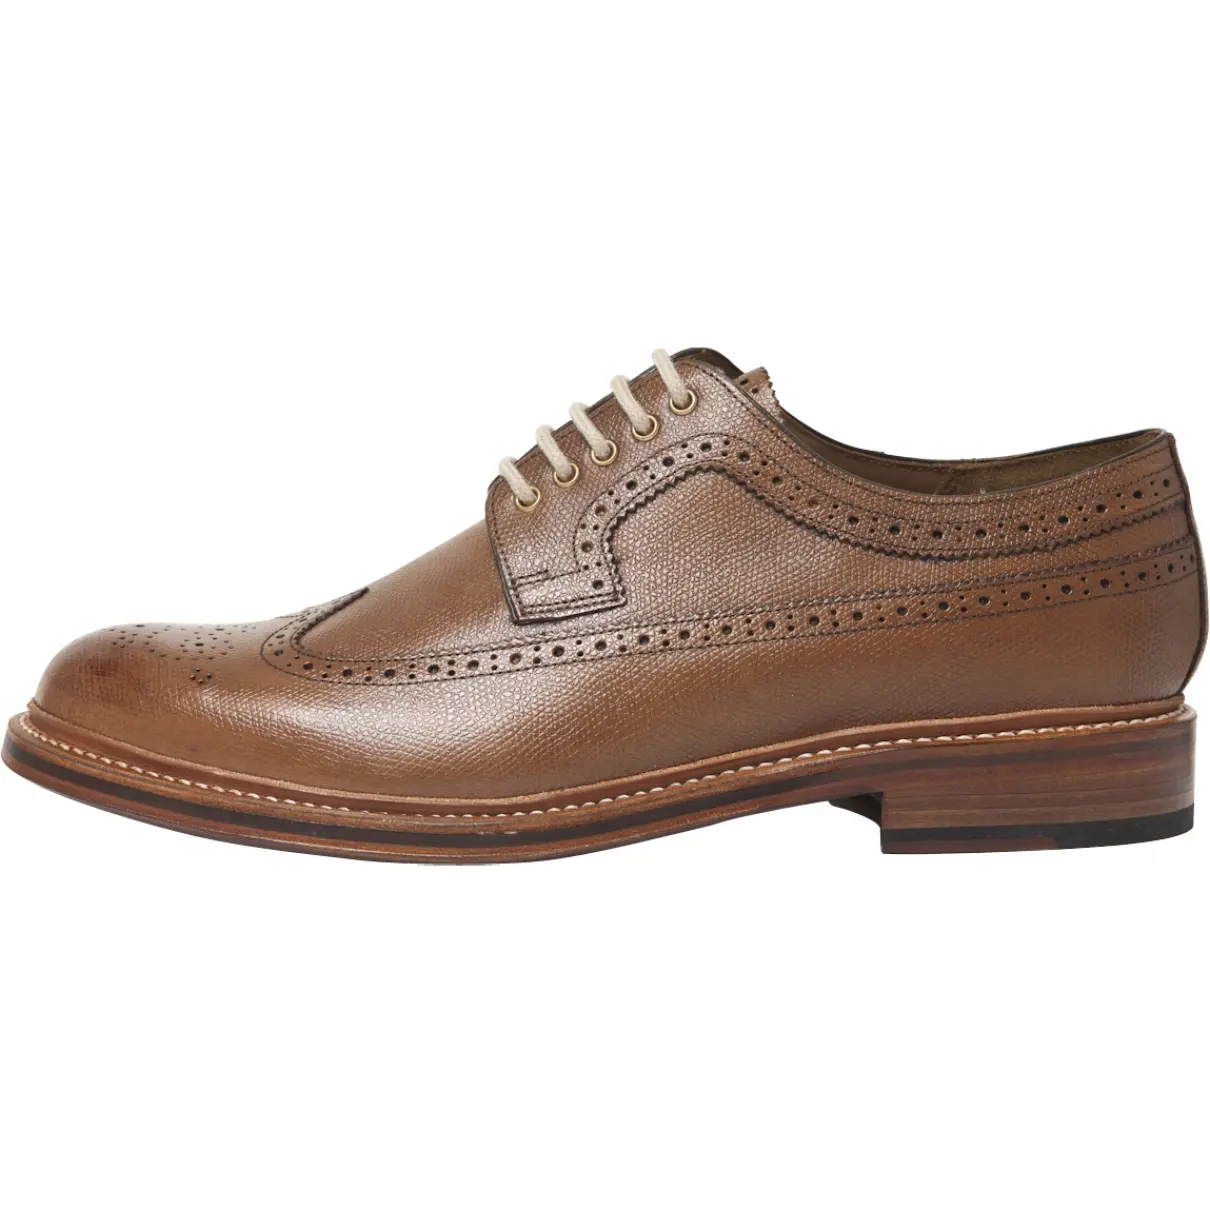 SID DERBY SHOES, IN BROWN LEATHER Grenson